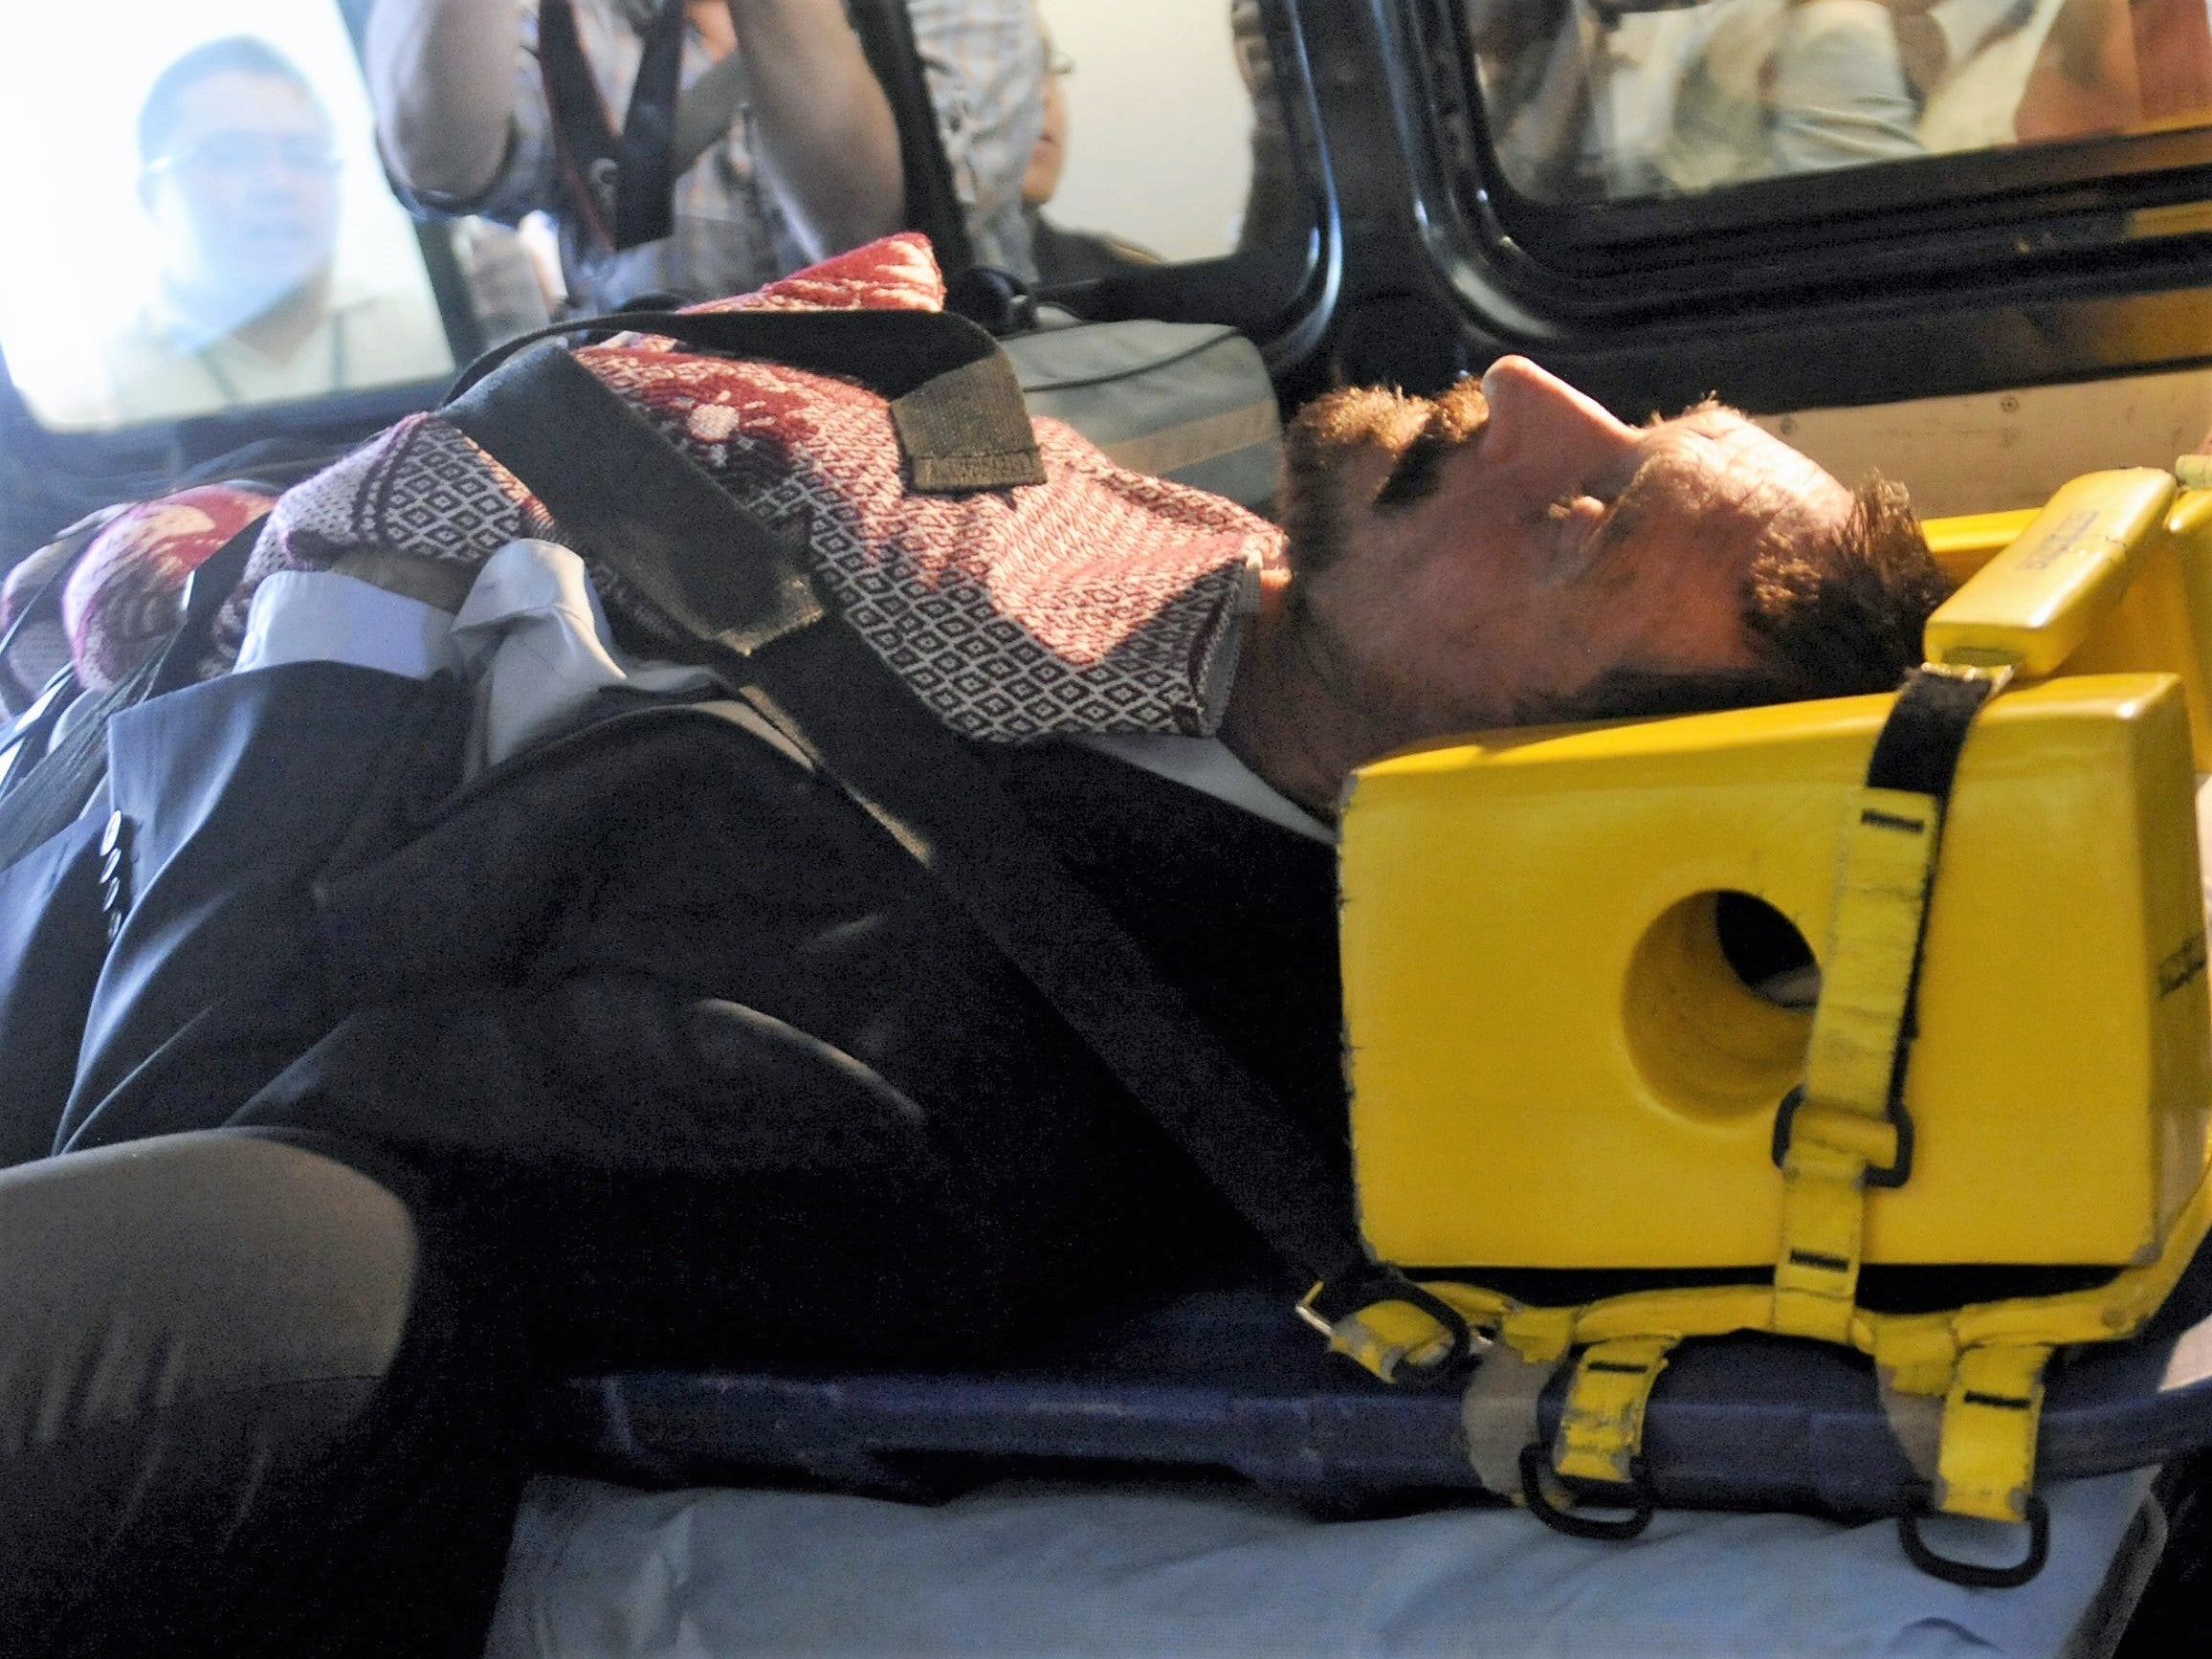 John McAfee is transferred in an ambulance to the national police hospital in Guatemala City on 6 December, 2012